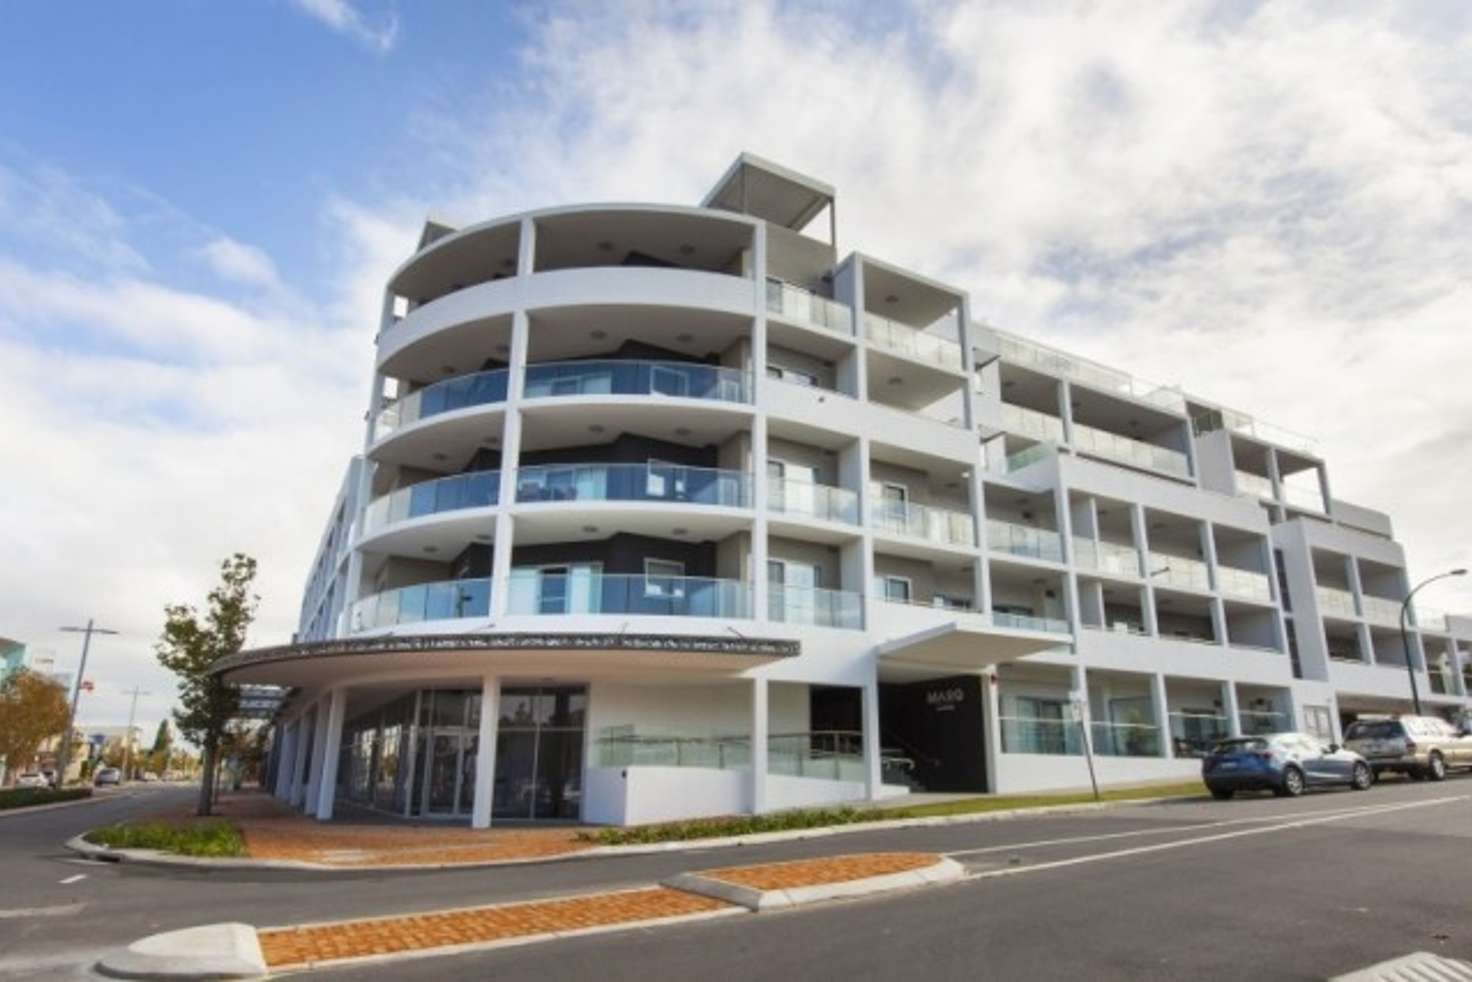 Main view of Homely apartment listing, 22/110 Cambridge Street, West Leederville WA 6007